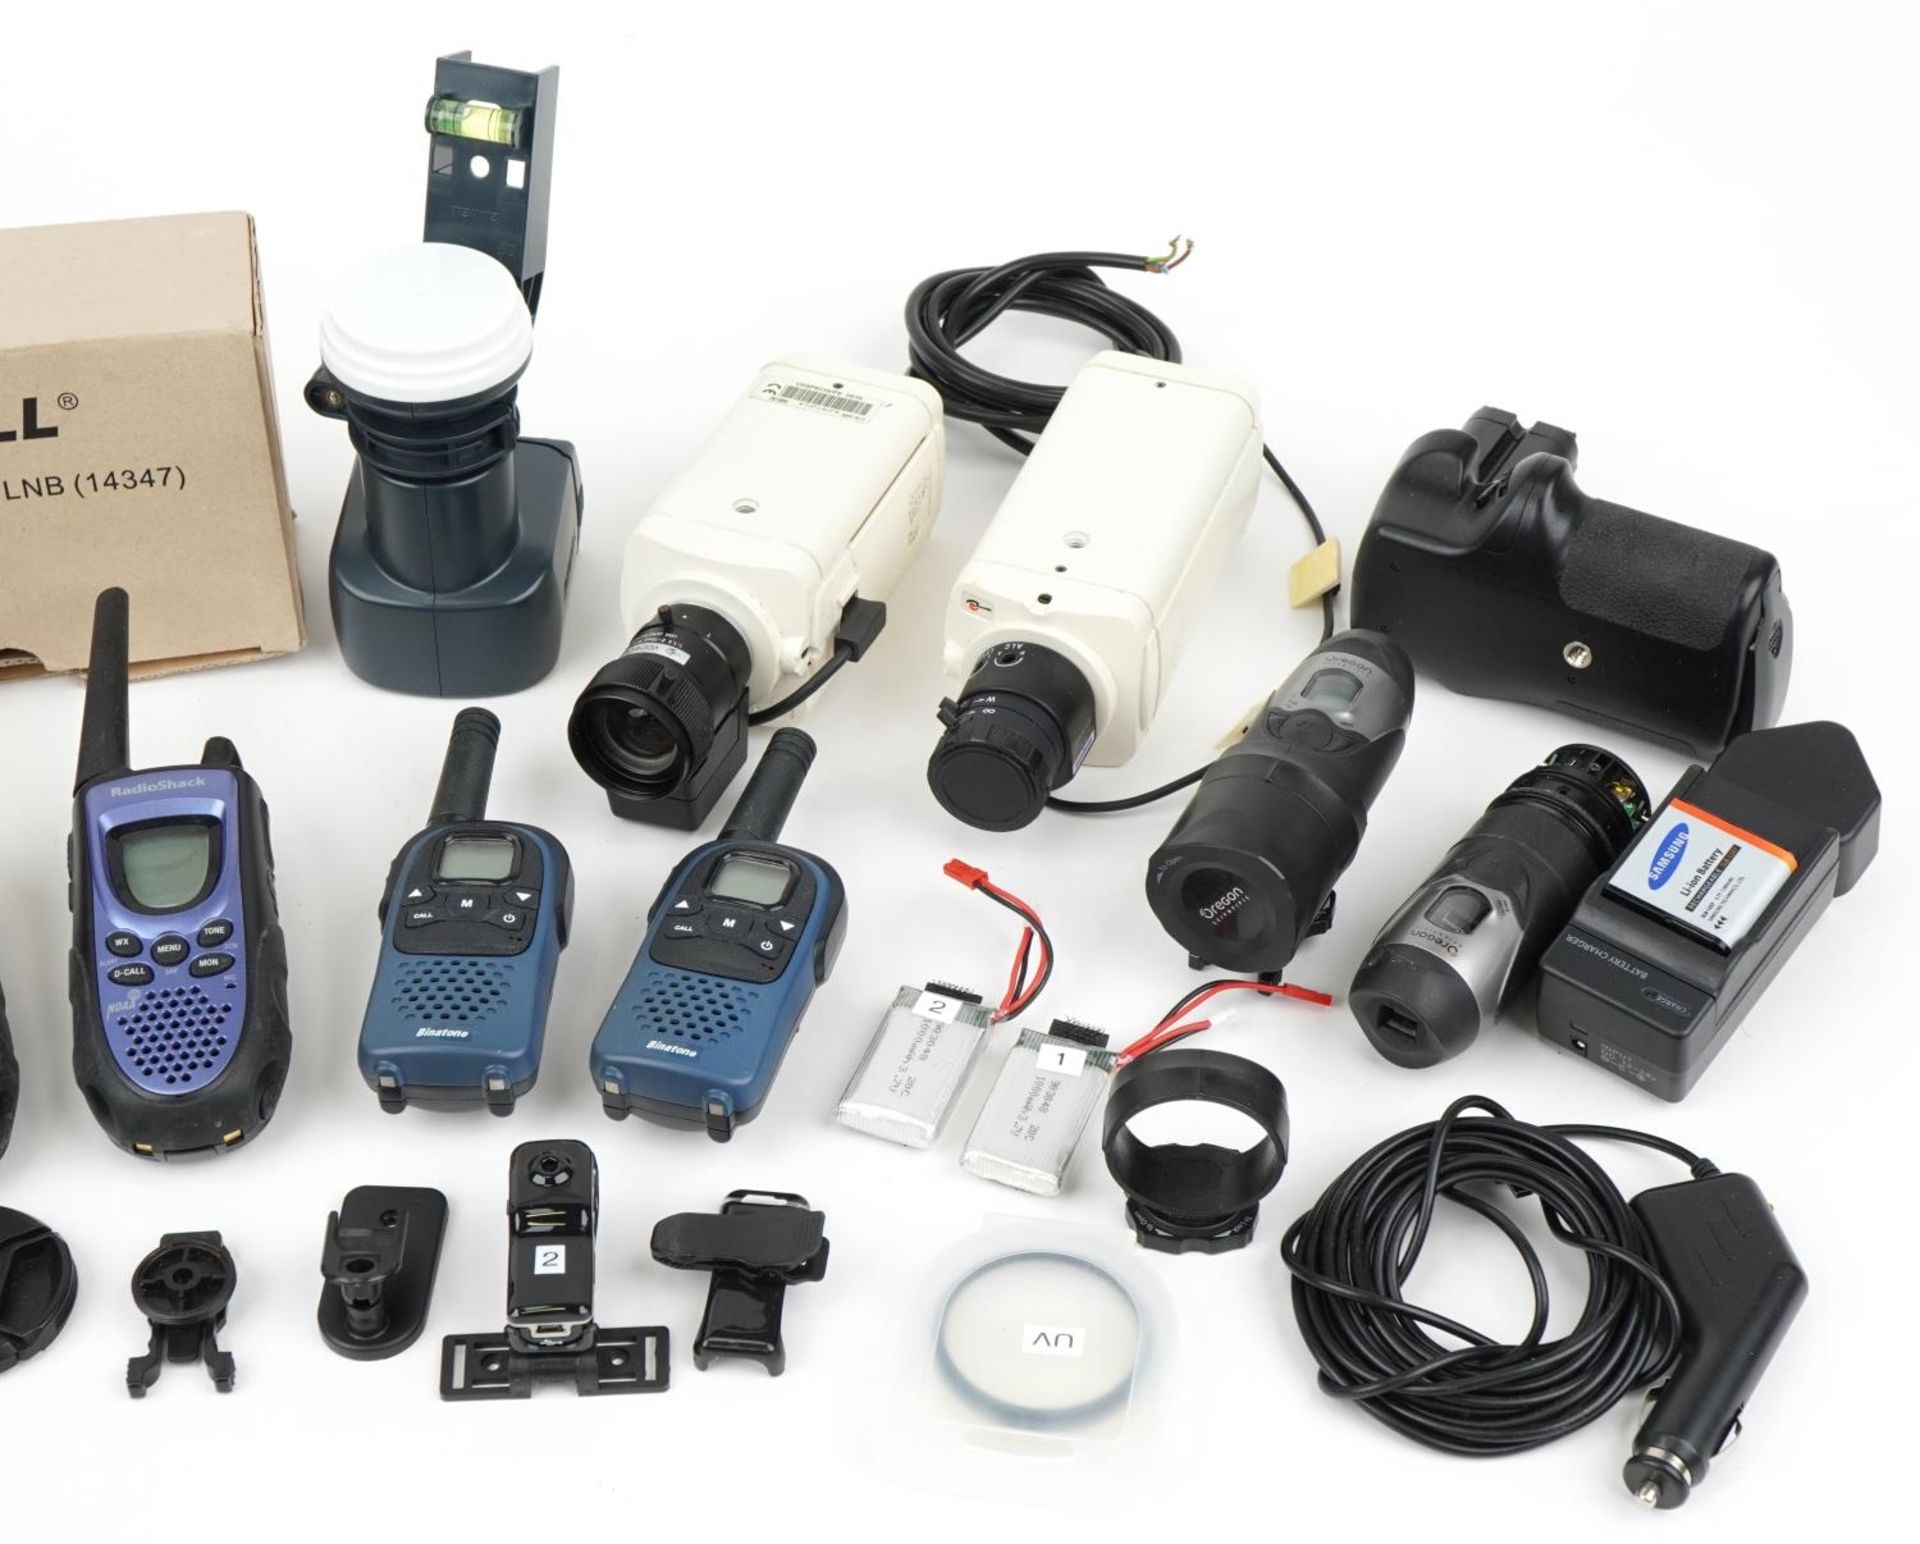 Collection of security cameras, accesories and walkie talkies - Image 3 of 4